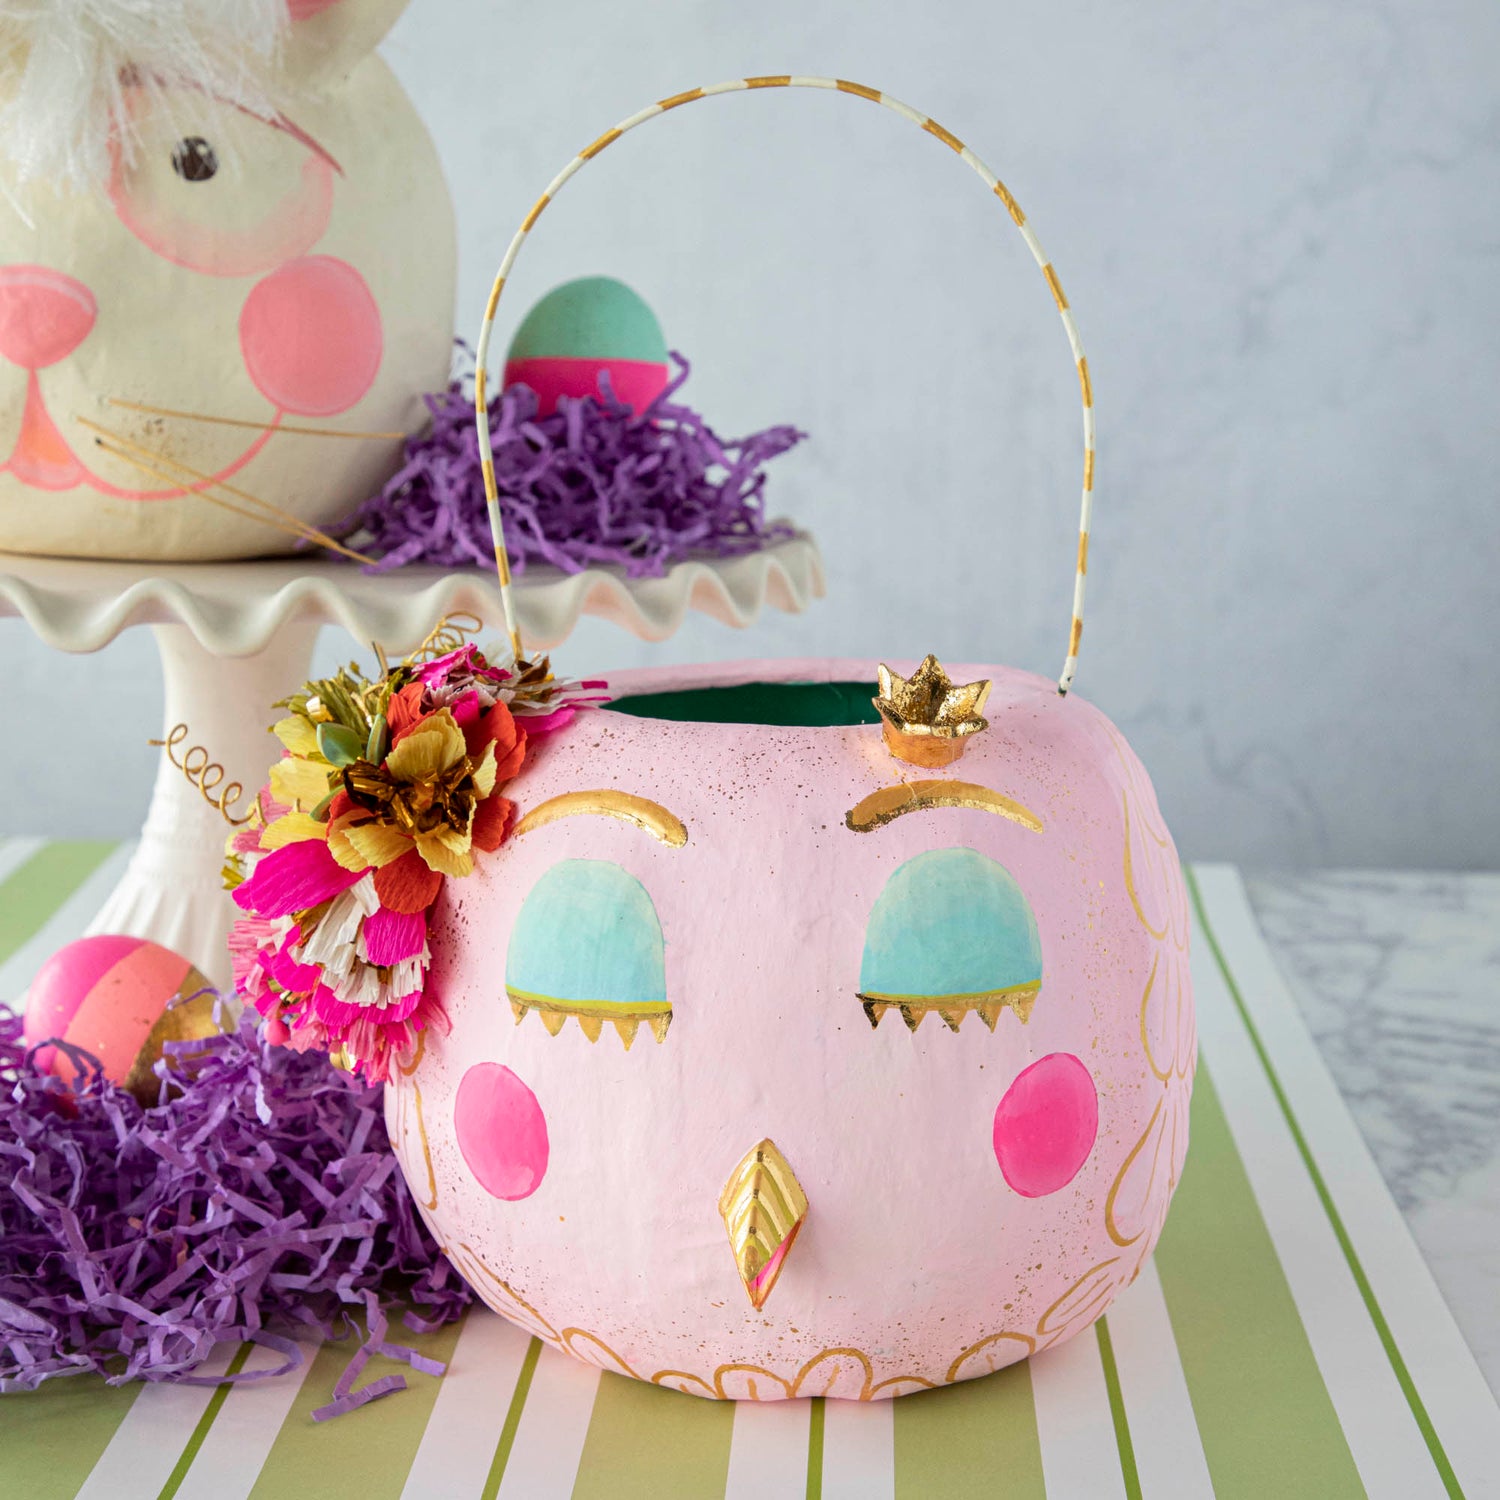 A festive pink Glitterville Papermache Easter Bucket adorned with a cute owl and bunny design.